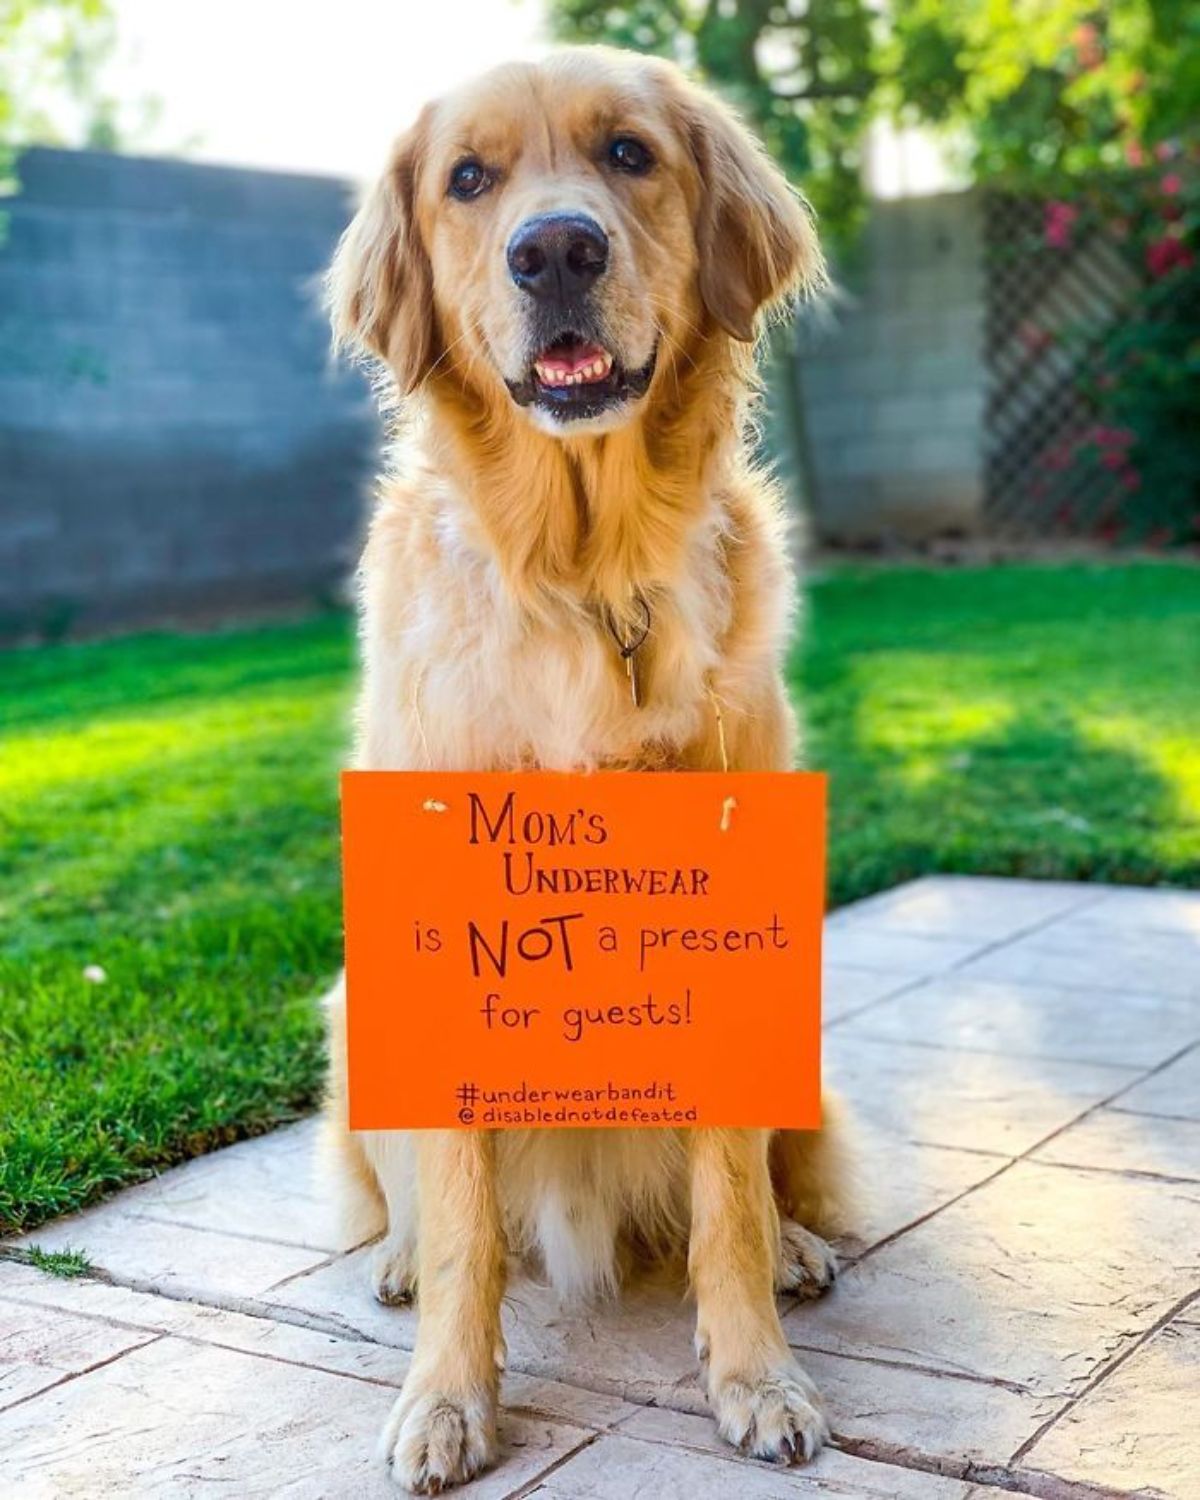 golden retriever sitting on the ground in a garden with a note saying "Mom's underwear is not a present for guests!"